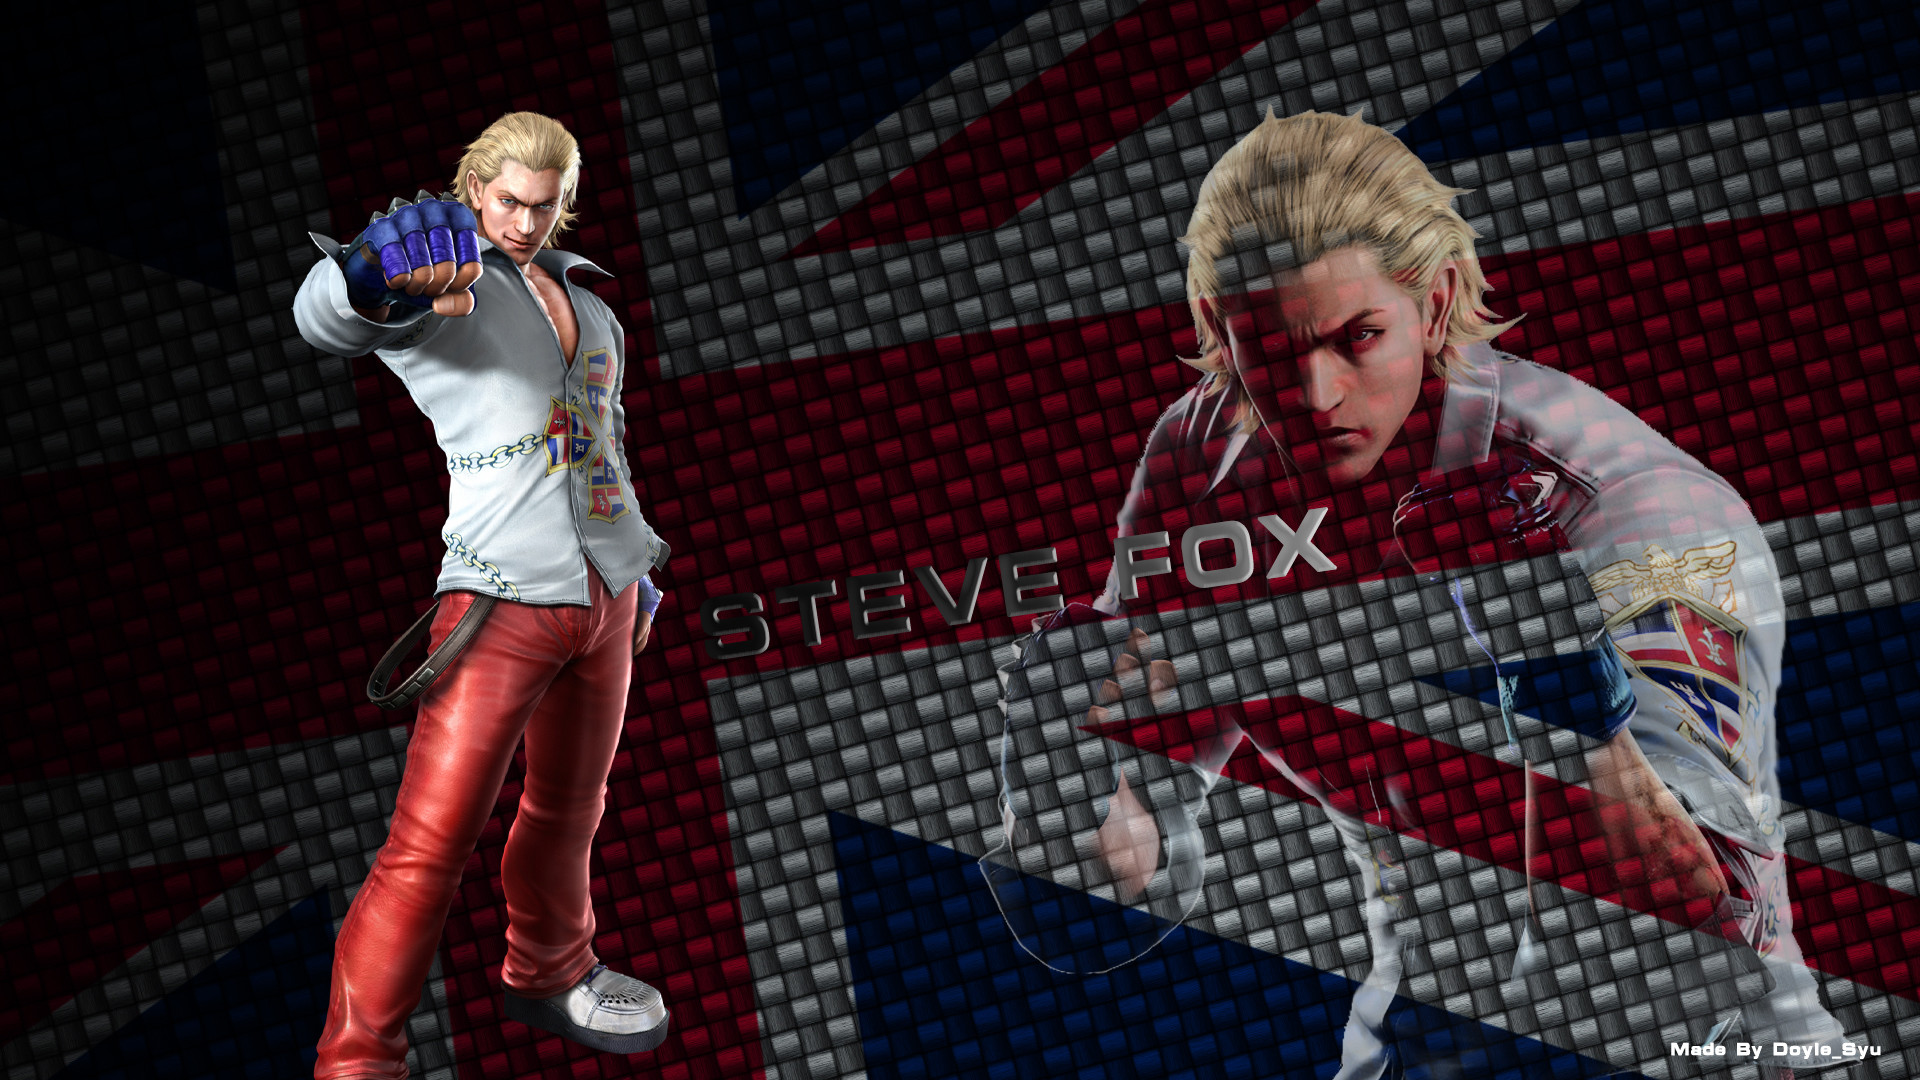 1920x1080 Steve Fox screenshots, images and pictures - Giant Bomb